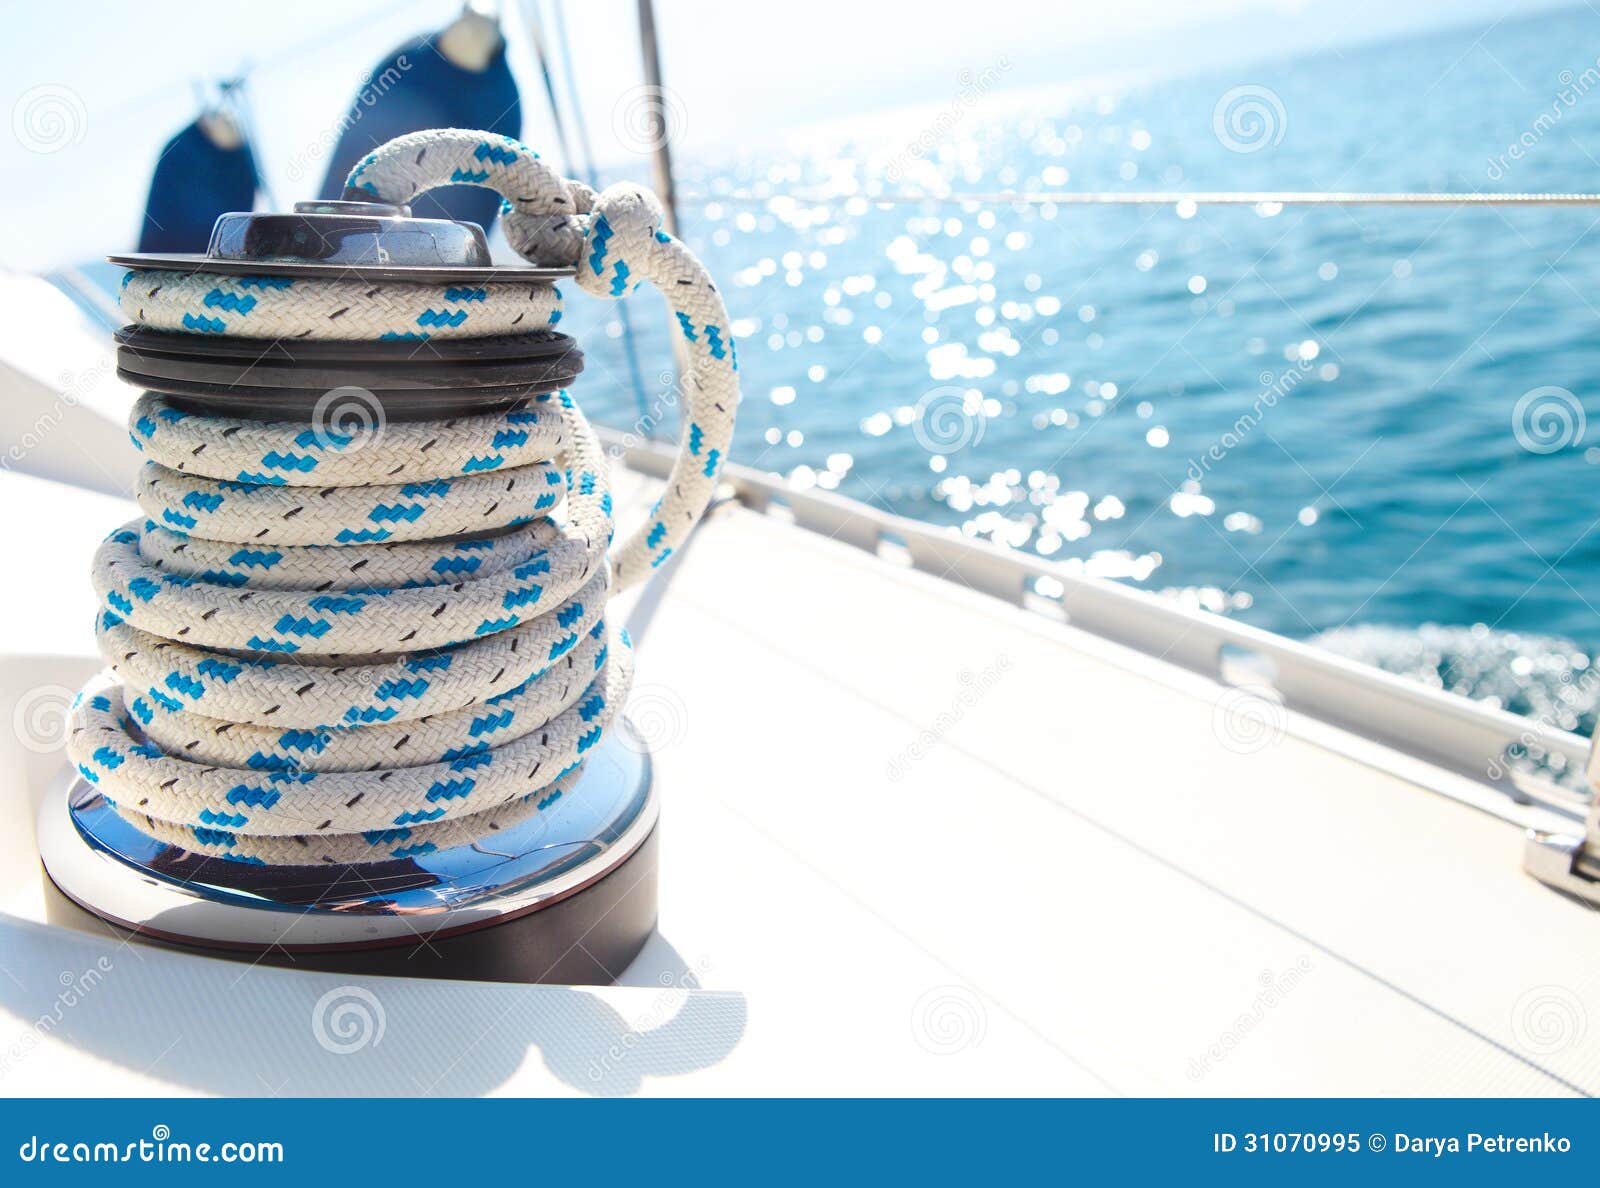 Sailboat Winch And Rope Yacht Detail Stock Image - Image ...